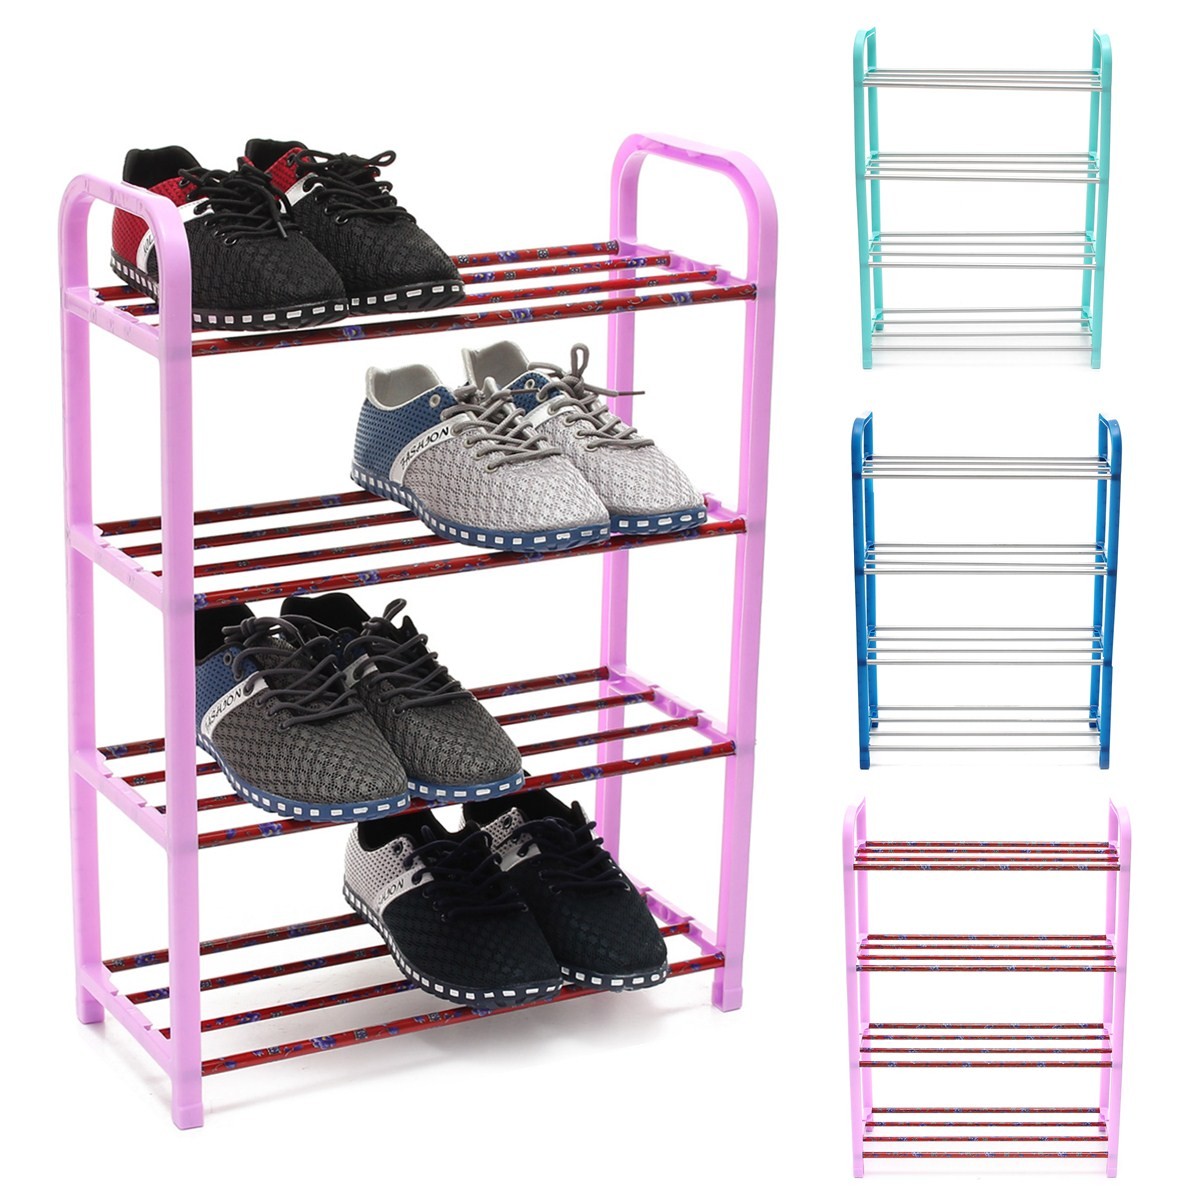 

4 Tiers Shoes Display Storage Organizer Stainless Steel DIY Cabinet Towel Rack Stand Shelf Holder Unit Shelves